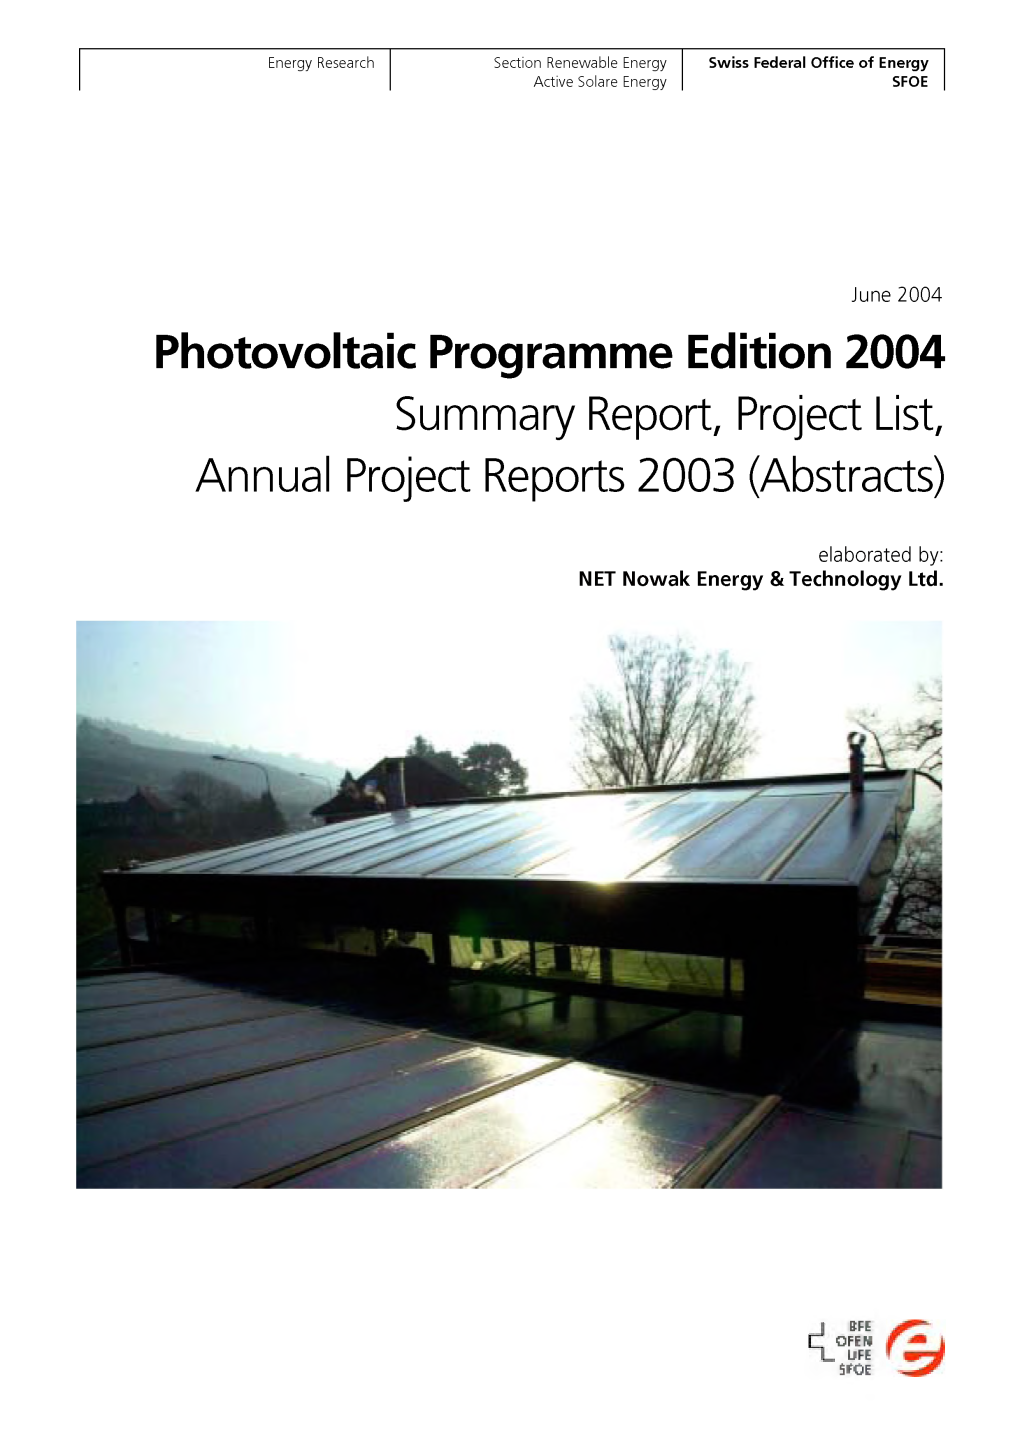 Photovoltaic Programme Edition 2004 Summary Report, Project List, Annual Project Reports 2003 (Abstracts)